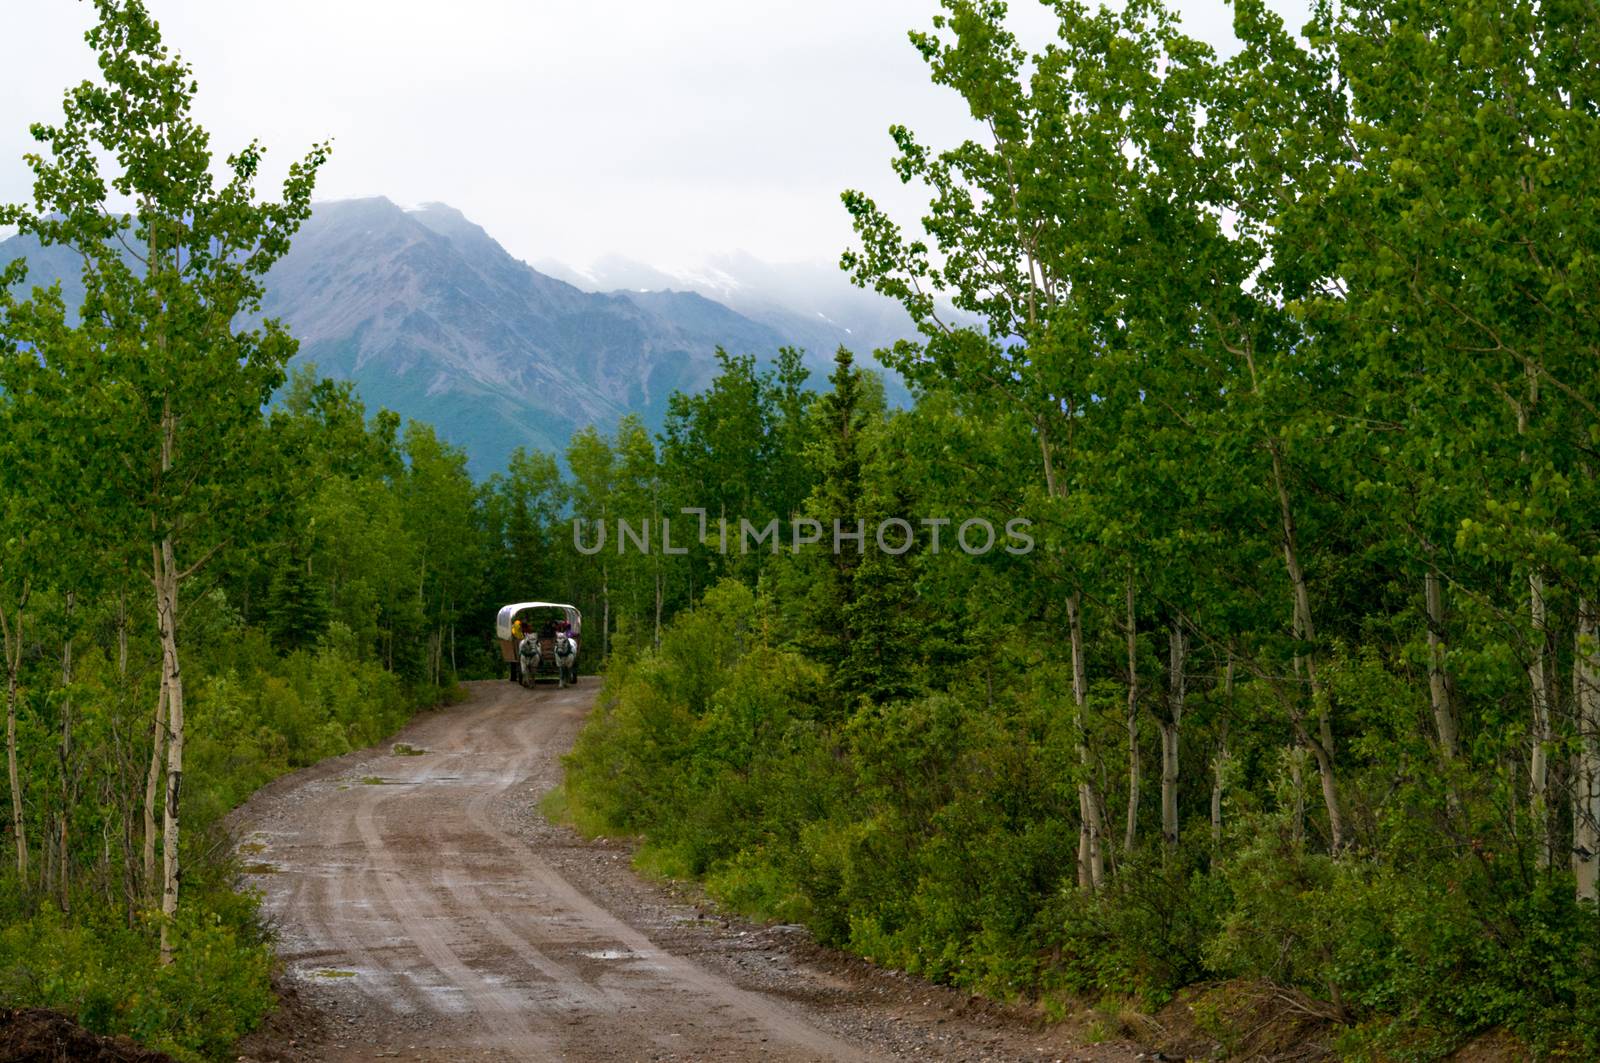 Covered Wagon in Mt woods on the boundry of Denali National Park